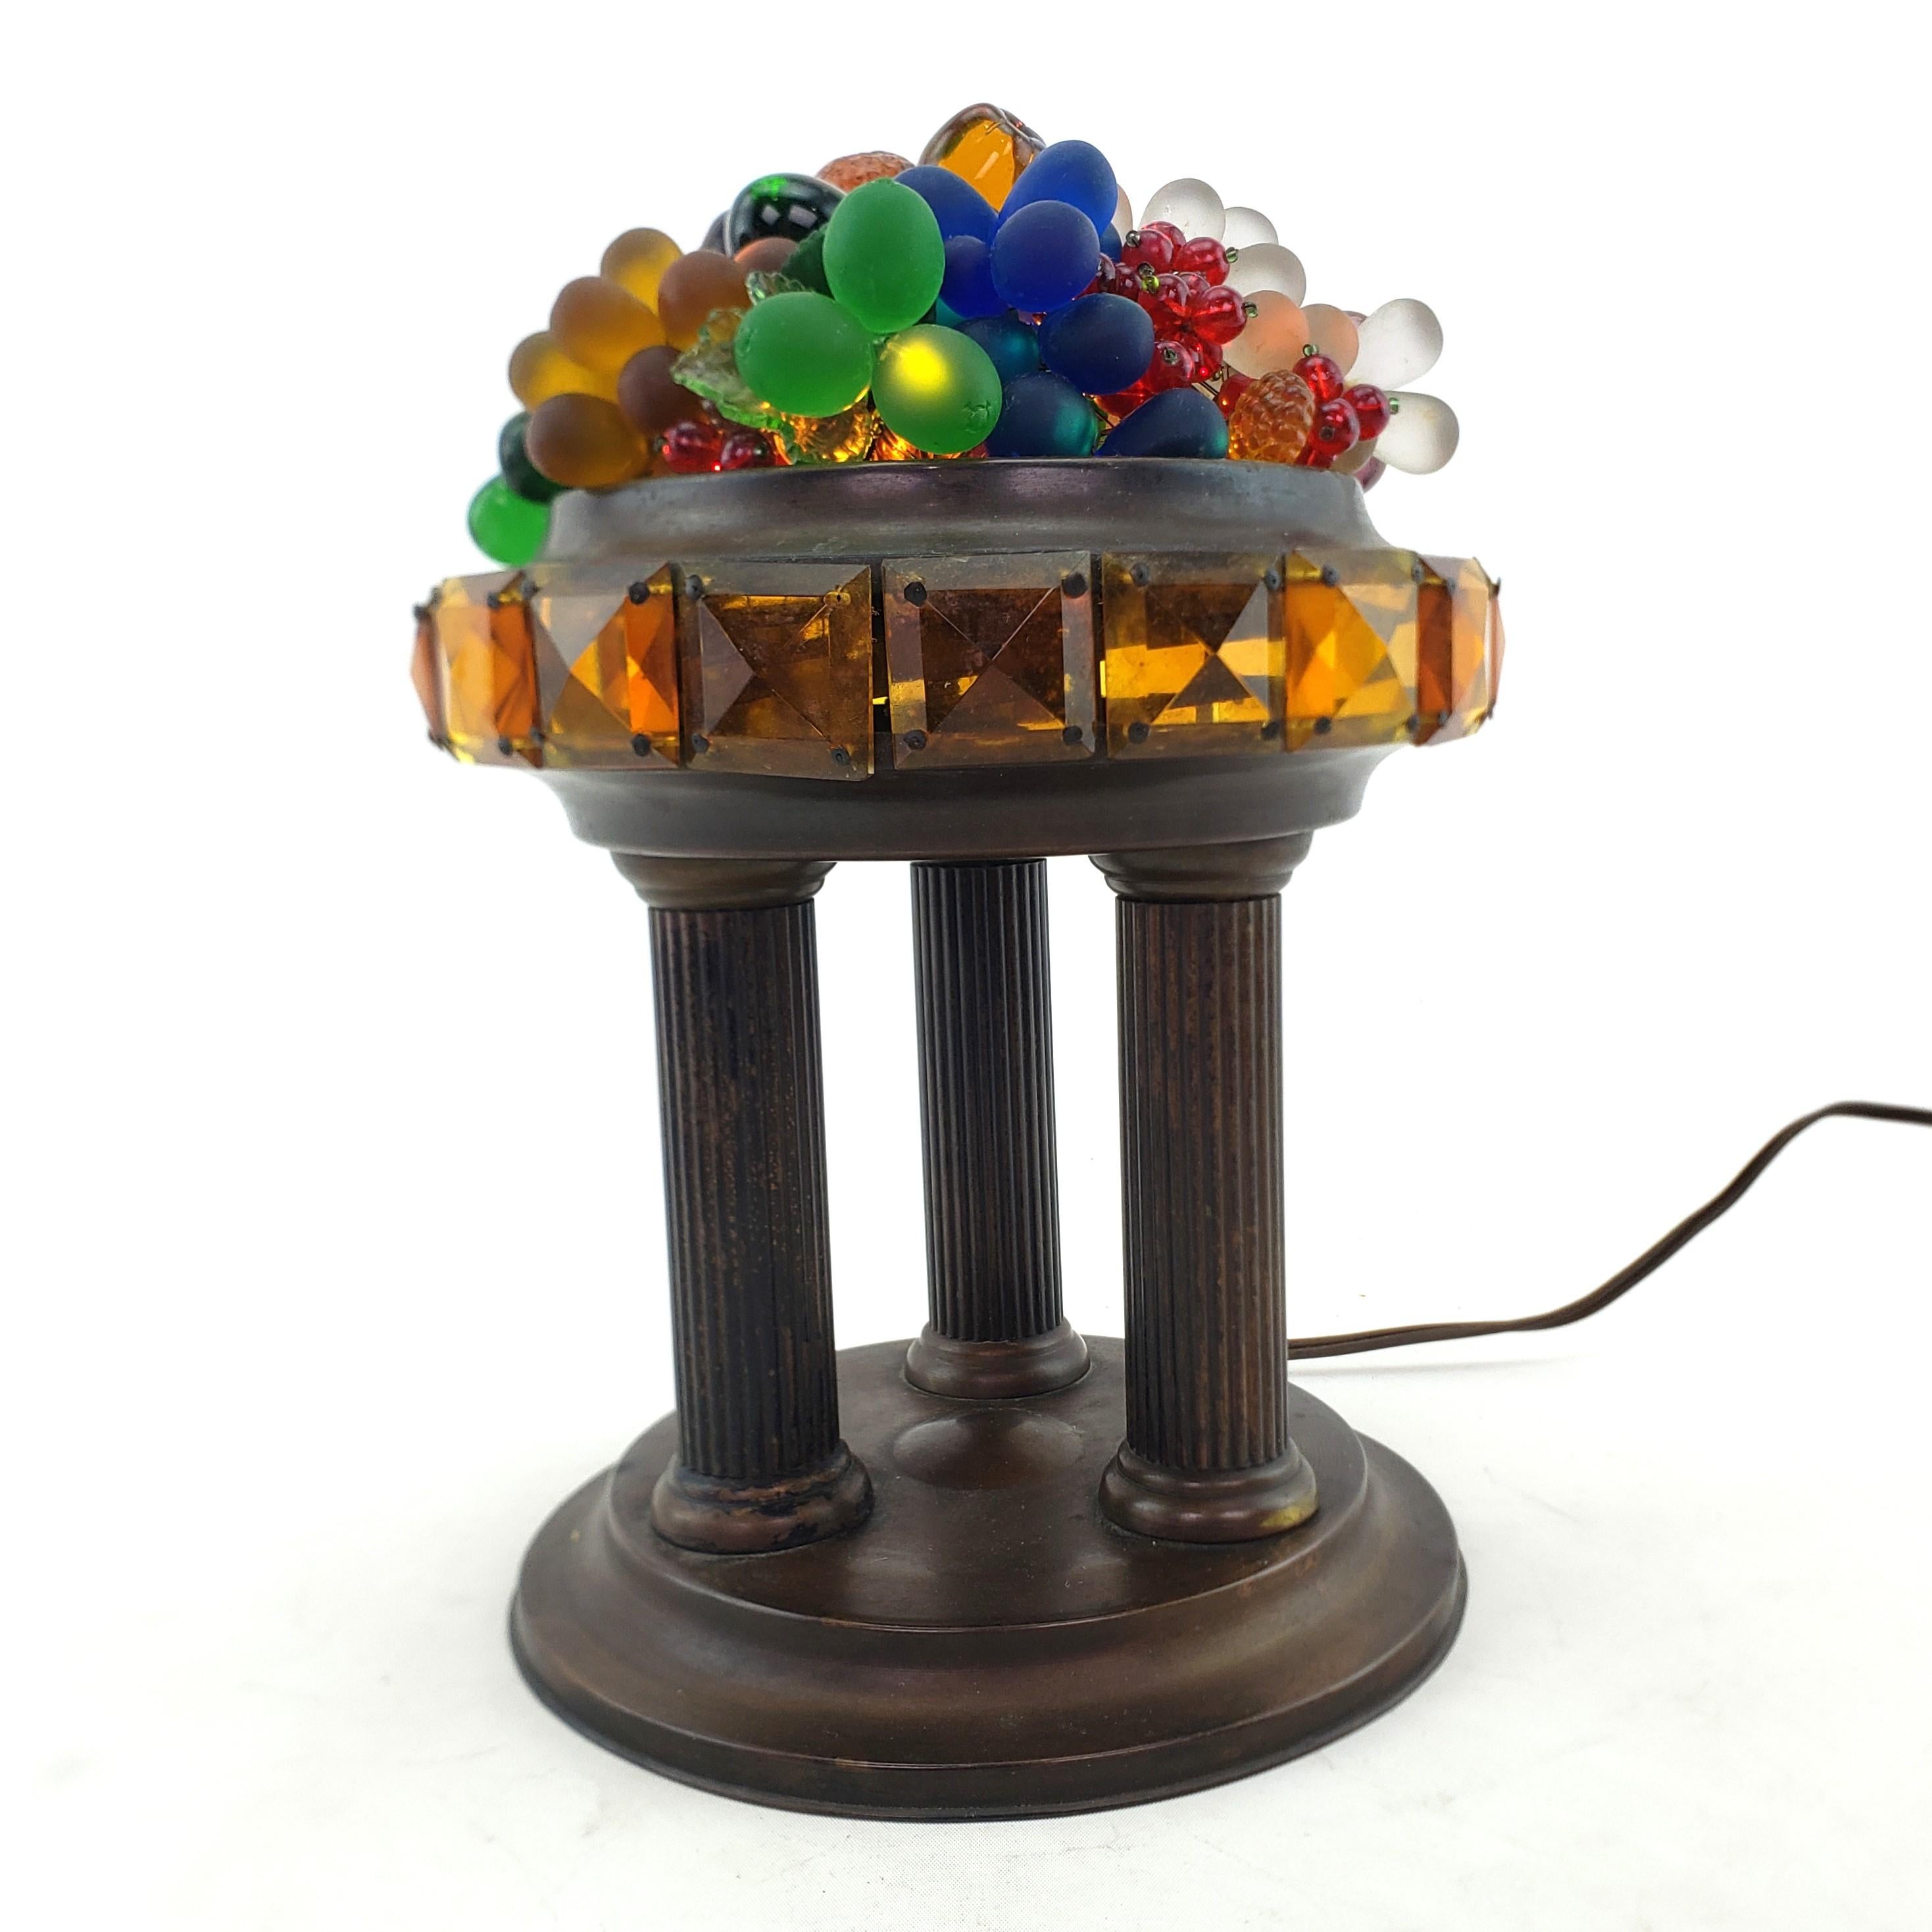 This vintage accent table light is unsigned with respect to the maker, but presumed to have originated from the Czech Republic and date to approximately 1960 and done in a classical style. The lamp shade is composed of a series of molded and